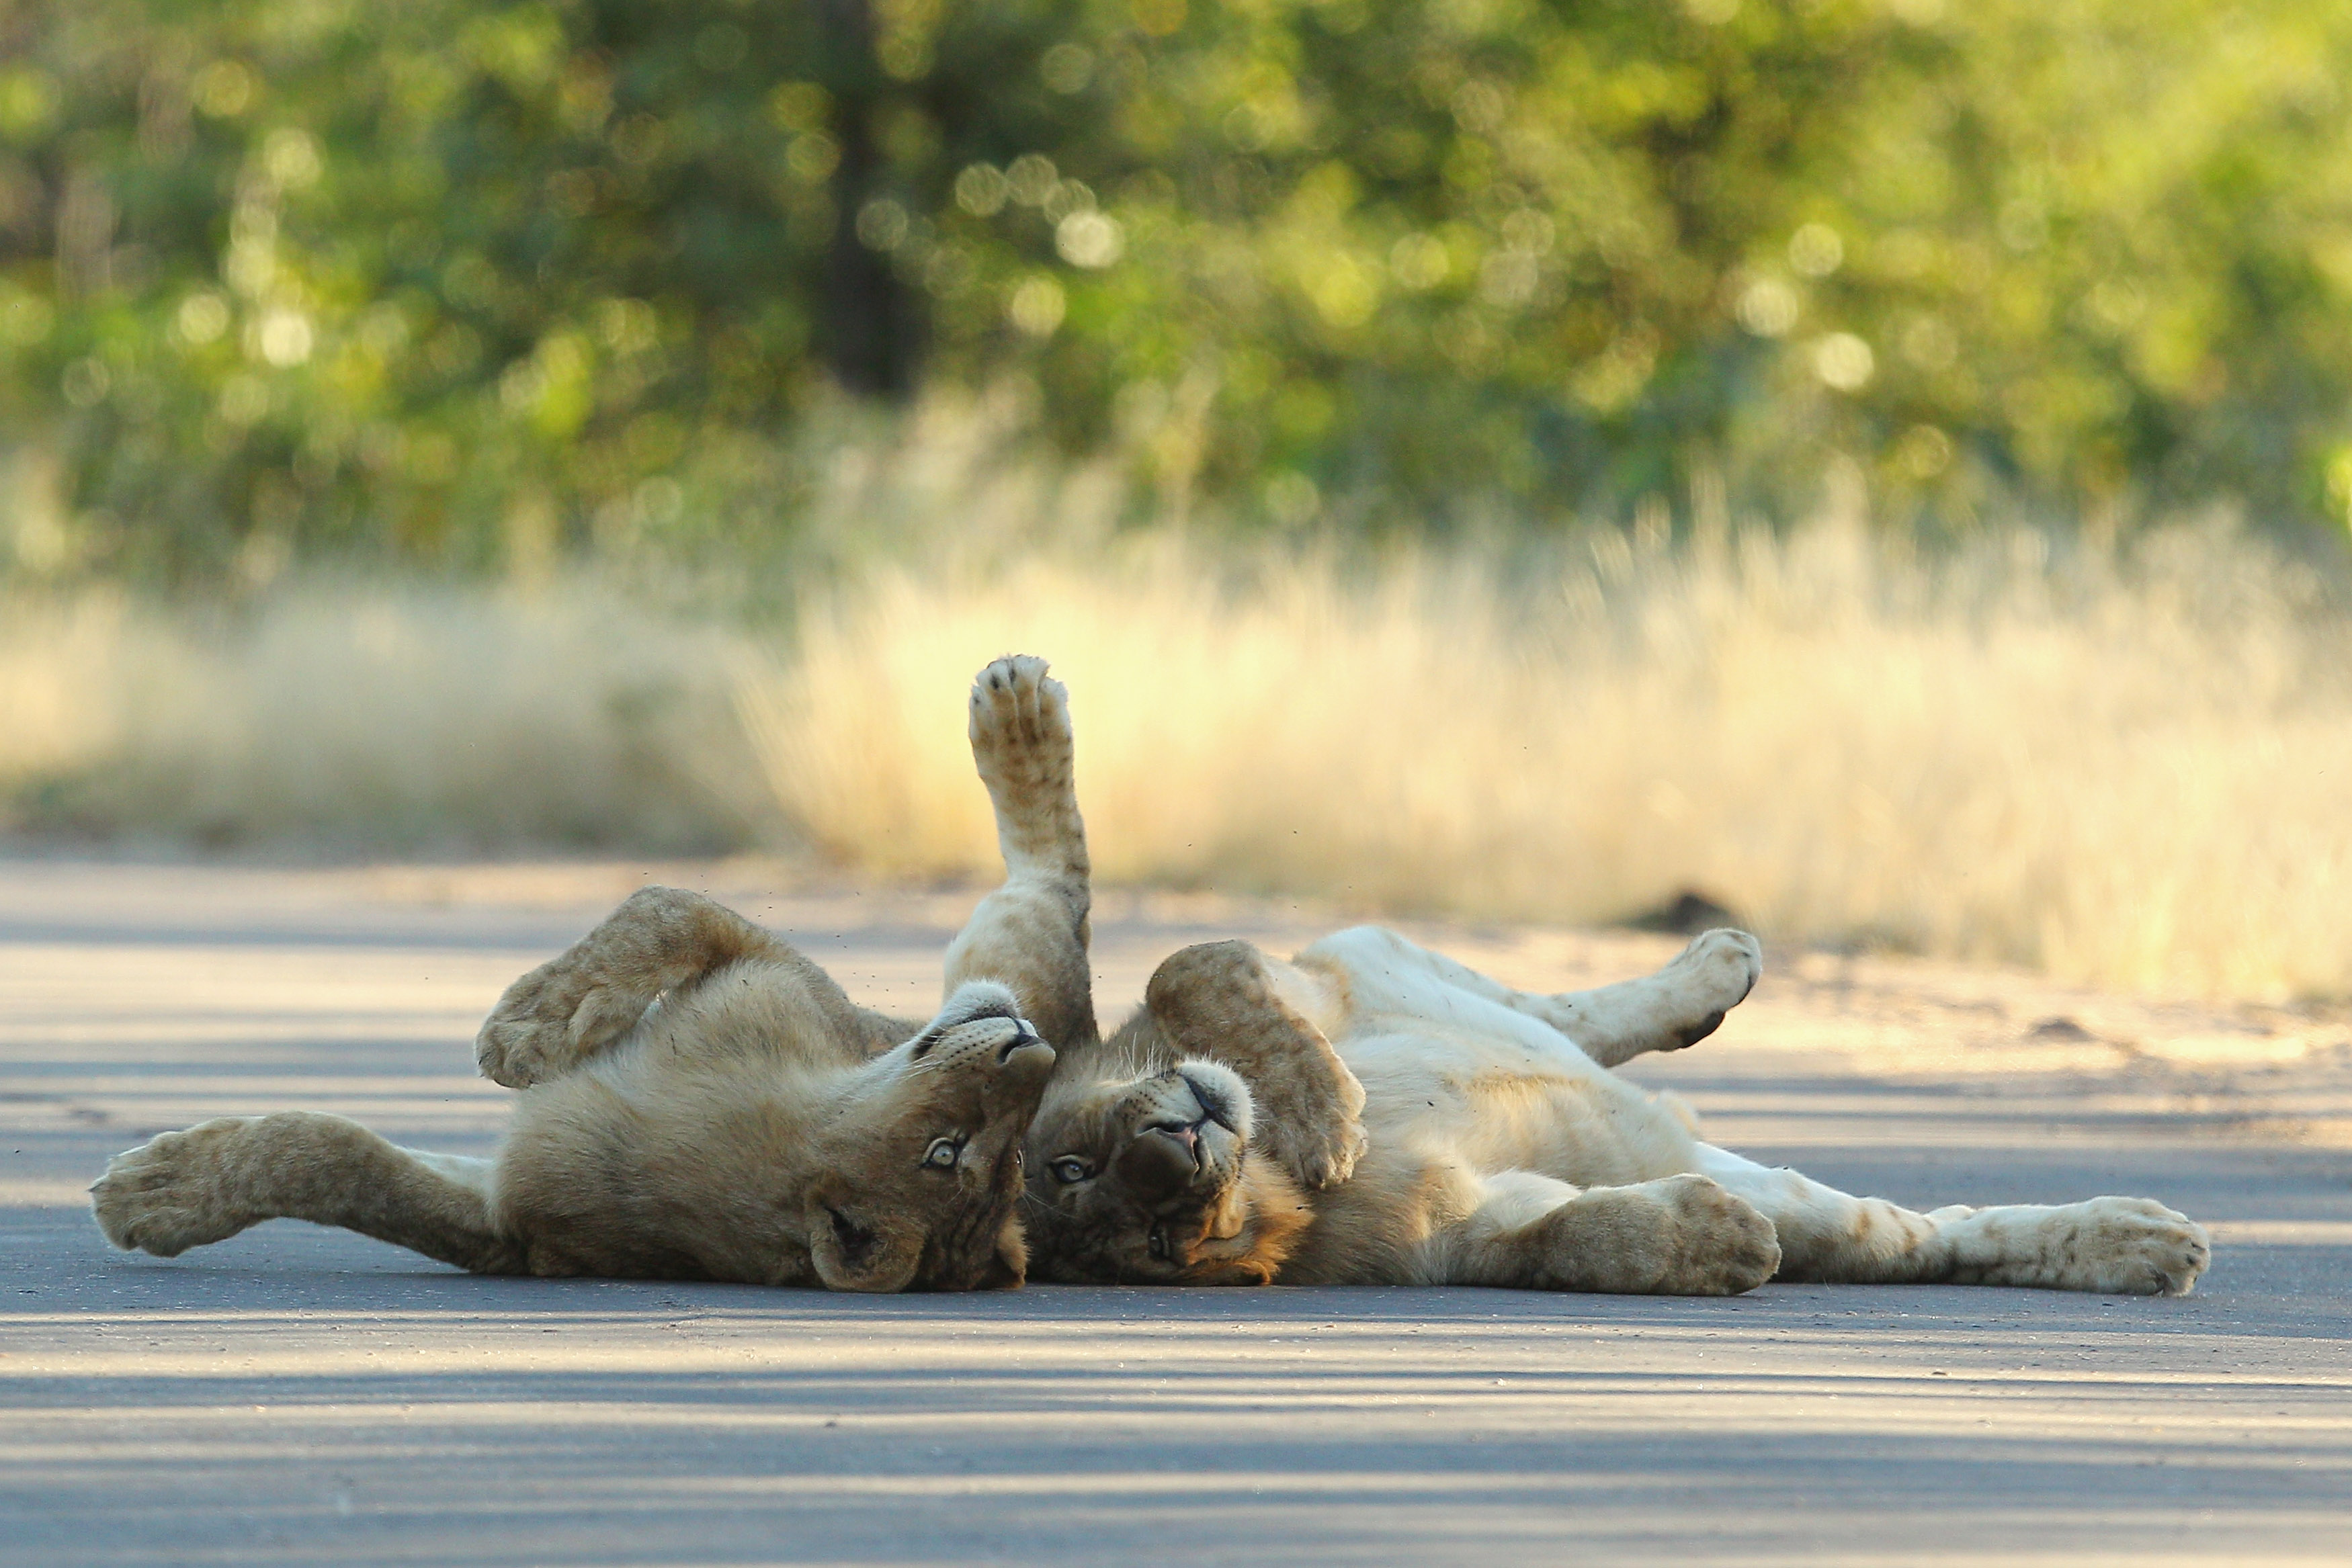 LIMPOPO, SOUTH AFRICA - JULY 23: Young male lions relax on a sealed road at the Pafuri game reserve on July 23, 2010 in Kruger National Park, South Africa. Kruger National Park is one of the largest game reserves in South Africa spanning 19,000 square kilometres and is part of the Great Limpopo Transfrontier Park. (Photo by Cameron Spencer/Getty Images)